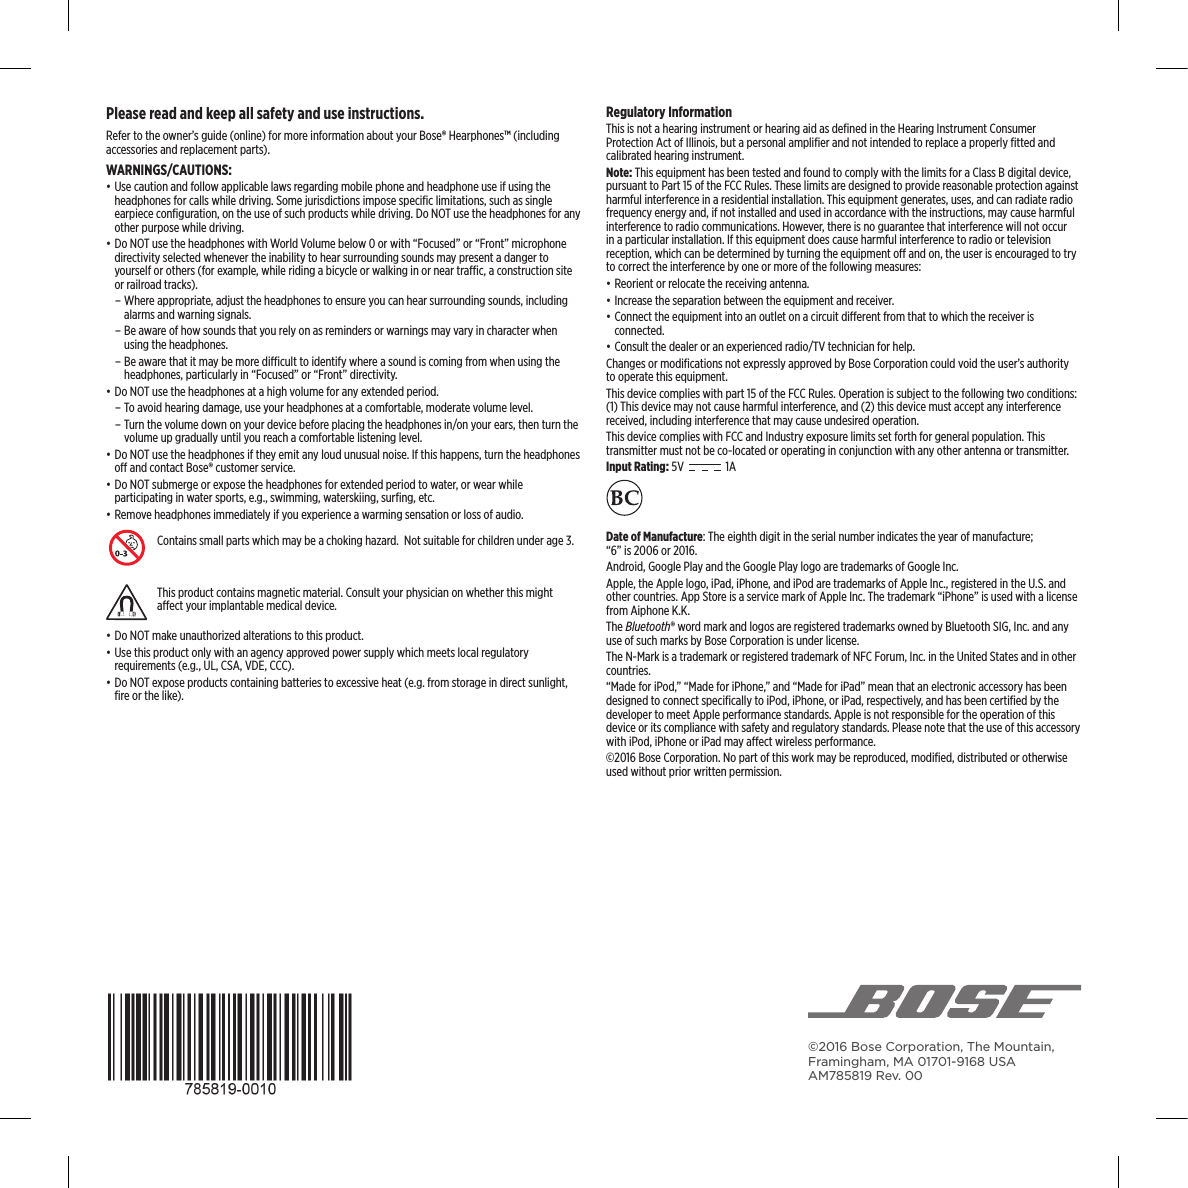 ©2016 Bose Corporation, The Mountain, Framingham, MA 01701-9168 USA AM785819 Rev. 00Please read and keep all safety and use instructions.Refer to the owner’s guide (online) for more information about your Bose® Hearphones™ (including accessories and replacement parts).WARNINGS/CAUTIONS:• Use caution and follow applicable laws regarding mobile phone and headphone use if using the headphones for calls while driving. Some jurisdictions impose speciﬁc limitations, such as single earpiece conﬁguration, on the use of such products while driving. Do NOT use the headphones for any other purpose while driving.• Do NOT use the headphones with World Volume below 0 or with “Focused” or “Front” microphone directivity selected whenever the inability to hear surrounding sounds may present a danger to yourself or others (for example, while riding a bicycle or walking in or near trac, a construction site or railroad tracks). – Where appropriate, adjust the headphones to ensure you can hear surrounding sounds, including alarms and warning signals. – Be aware of how sounds that you rely on as reminders or warnings may vary in character when using the headphones.  –  Be aware that it may be more dicult to identify where a sound is coming from when using the headphones, particularly in “Focused” or “Front” directivity.• Do NOT use the headphones at a high volume for any extended period. – To avoid hearing damage, use your headphones at a comfortable, moderate volume level. – Turn the volume down on your device before placing the headphones in/on your ears, then turn the volume up gradually until you reach a comfortable listening level.• Do NOT use the headphones if they emit any loud unusual noise. If this happens, turn the  headphones o and contact Bose® customer service.• Do NOT submerge or expose the headphones for extended period to water, or wear while  participating in water sports, e.g., swimming, waterskiing, surﬁng, etc.• Remove headphones immediately if you experience a warming  sensation or loss of audio.Contains small parts which may be a choking hazard.  Not suitable for children under age 3.This product contains magnetic material. Consult your physician on whether this might aect your implantable medical device. • Do NOT make unauthorized alterations to this product.• Use this product only with an agency approved power supply which meets local regulatory  requirements (e.g., UL, CSA, VDE, CCC).• Do NOT expose products containing batteries to excessive heat (e.g. from storage in direct sunlight, ﬁre or the like).Regulatory InformationThis is not a hearing instrument or hearing aid as deﬁned in the Hearing Instrument Consumer  Protection Act of Illinois, but a personal ampliﬁer and not intended to replace a properly ﬁtted and calibrated hearing instrument.Note: This equipment has been tested and found to comply with the limits for a Class B digital device, pursuant to Part 15 of the FCC Rules. These limits are designed to provide reasonable protection against harmful interference in a residential installation. This equipment generates, uses, and can radiate radio frequency energy and, if not installed and used in accordance with the instructions, may cause harmful interference to radio communications. However, there is no guarantee that interference will not occur in a particular installation. If this equipment does cause harmful interference to radio or television reception, which can be determined by turning the equipment o and on, the user is encouraged to try to correct the interference by one or more of the following measures:• Reorient or relocate the receiving antenna.• Increase the separation between the equipment and receiver.• Connect the equipment into an outlet on a circuit dierent from that to which the receiver is connected.• Consult the dealer or an experienced radio/TV technician for help.Changes or modiﬁcations not expressly approved by Bose Corporation could void the user’s authority to operate this equipment.This device complies with part 15 of the FCC Rules. Operation is subject to the following two conditions: (1) This device may not cause harmful interference, and (2) this device must accept any interference received, including interference that may cause undesired operation.This device complies with FCC and Industry exposure limits set forth for general population. This  transmitter must not be co-located or operating in conjunction with any other antenna or transmitter.Input Rating: 5V   1A Date of Manufacture: The eighth digit in the serial number indicates the year of manufacture;  “6” is 2006 or 2016.Android, Google Play and the Google Play logo are trademarks of Google Inc. Apple, the Apple logo, iPad, iPhone, and iPod are trademarks of Apple Inc., registered in the U.S. and other countries. App Store is a service mark of Apple Inc. The trademark “iPhone” is used with a license from Aiphone K.K.The Bluetooth® word mark and logos are registered trademarks owned by Bluetooth SIG, Inc. and any use of such marks by Bose Corporation is under license.The N-Mark is a trademark or registered trademark of NFC Forum, Inc. in the United States and in other countries.“Made for iPod,” “Made for iPhone,” and “Made for iPad” mean that an electronic accessory has been designed to connect speciﬁcally to iPod, iPhone, or iPad, respectively, and has been certiﬁed by the developer to meet Apple performance standards. Apple is not responsible for the operation of this device or its compliance with safety and regulatory standards. Please note that the use of this accessory with iPod, iPhone or iPad may aect wireless performance.©2016 Bose Corporation. No part of this work may be reproduced, modiﬁed, distributed or otherwise used without prior written permission.